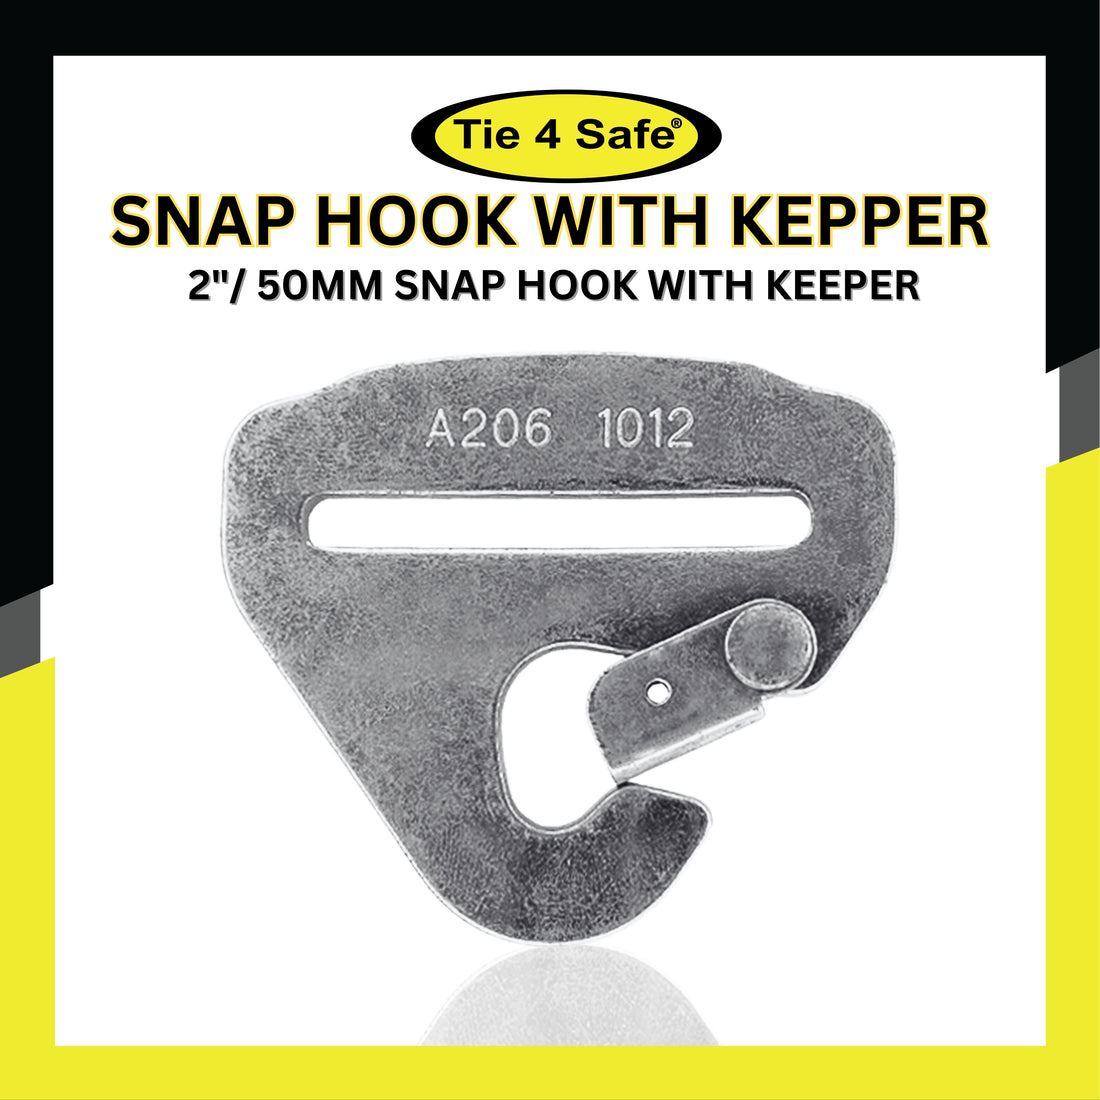 2" / 50 MM Snap Hook With Keeper